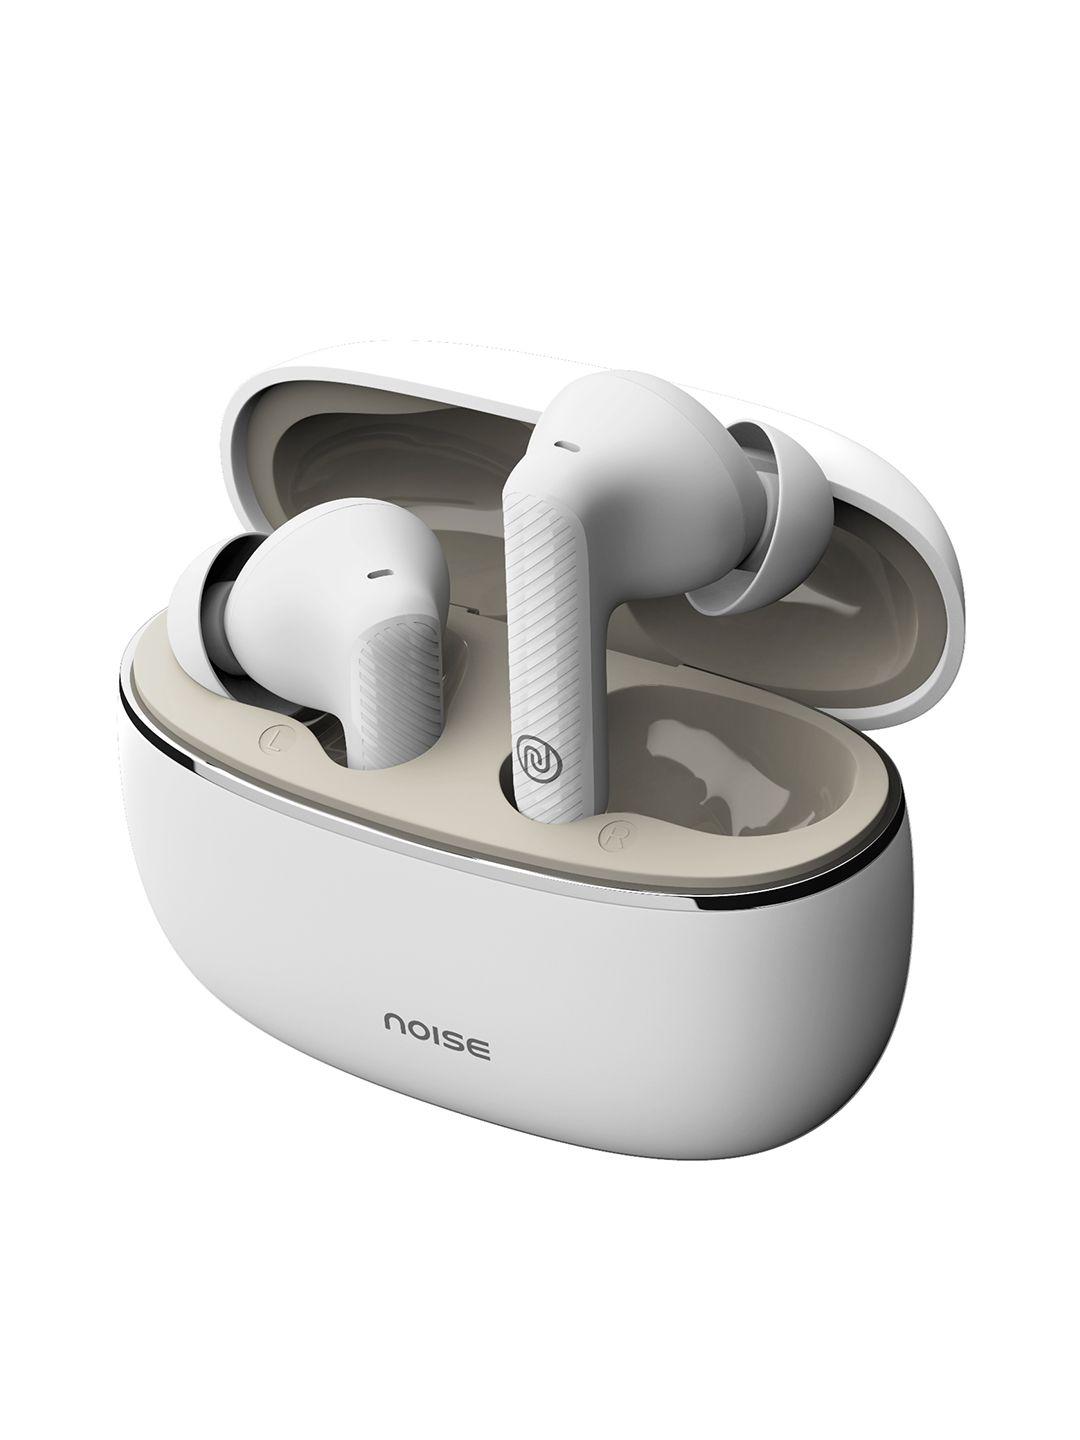 noise aura buds truly wireless earbuds with 60h playtime and quad mic enc - aura white